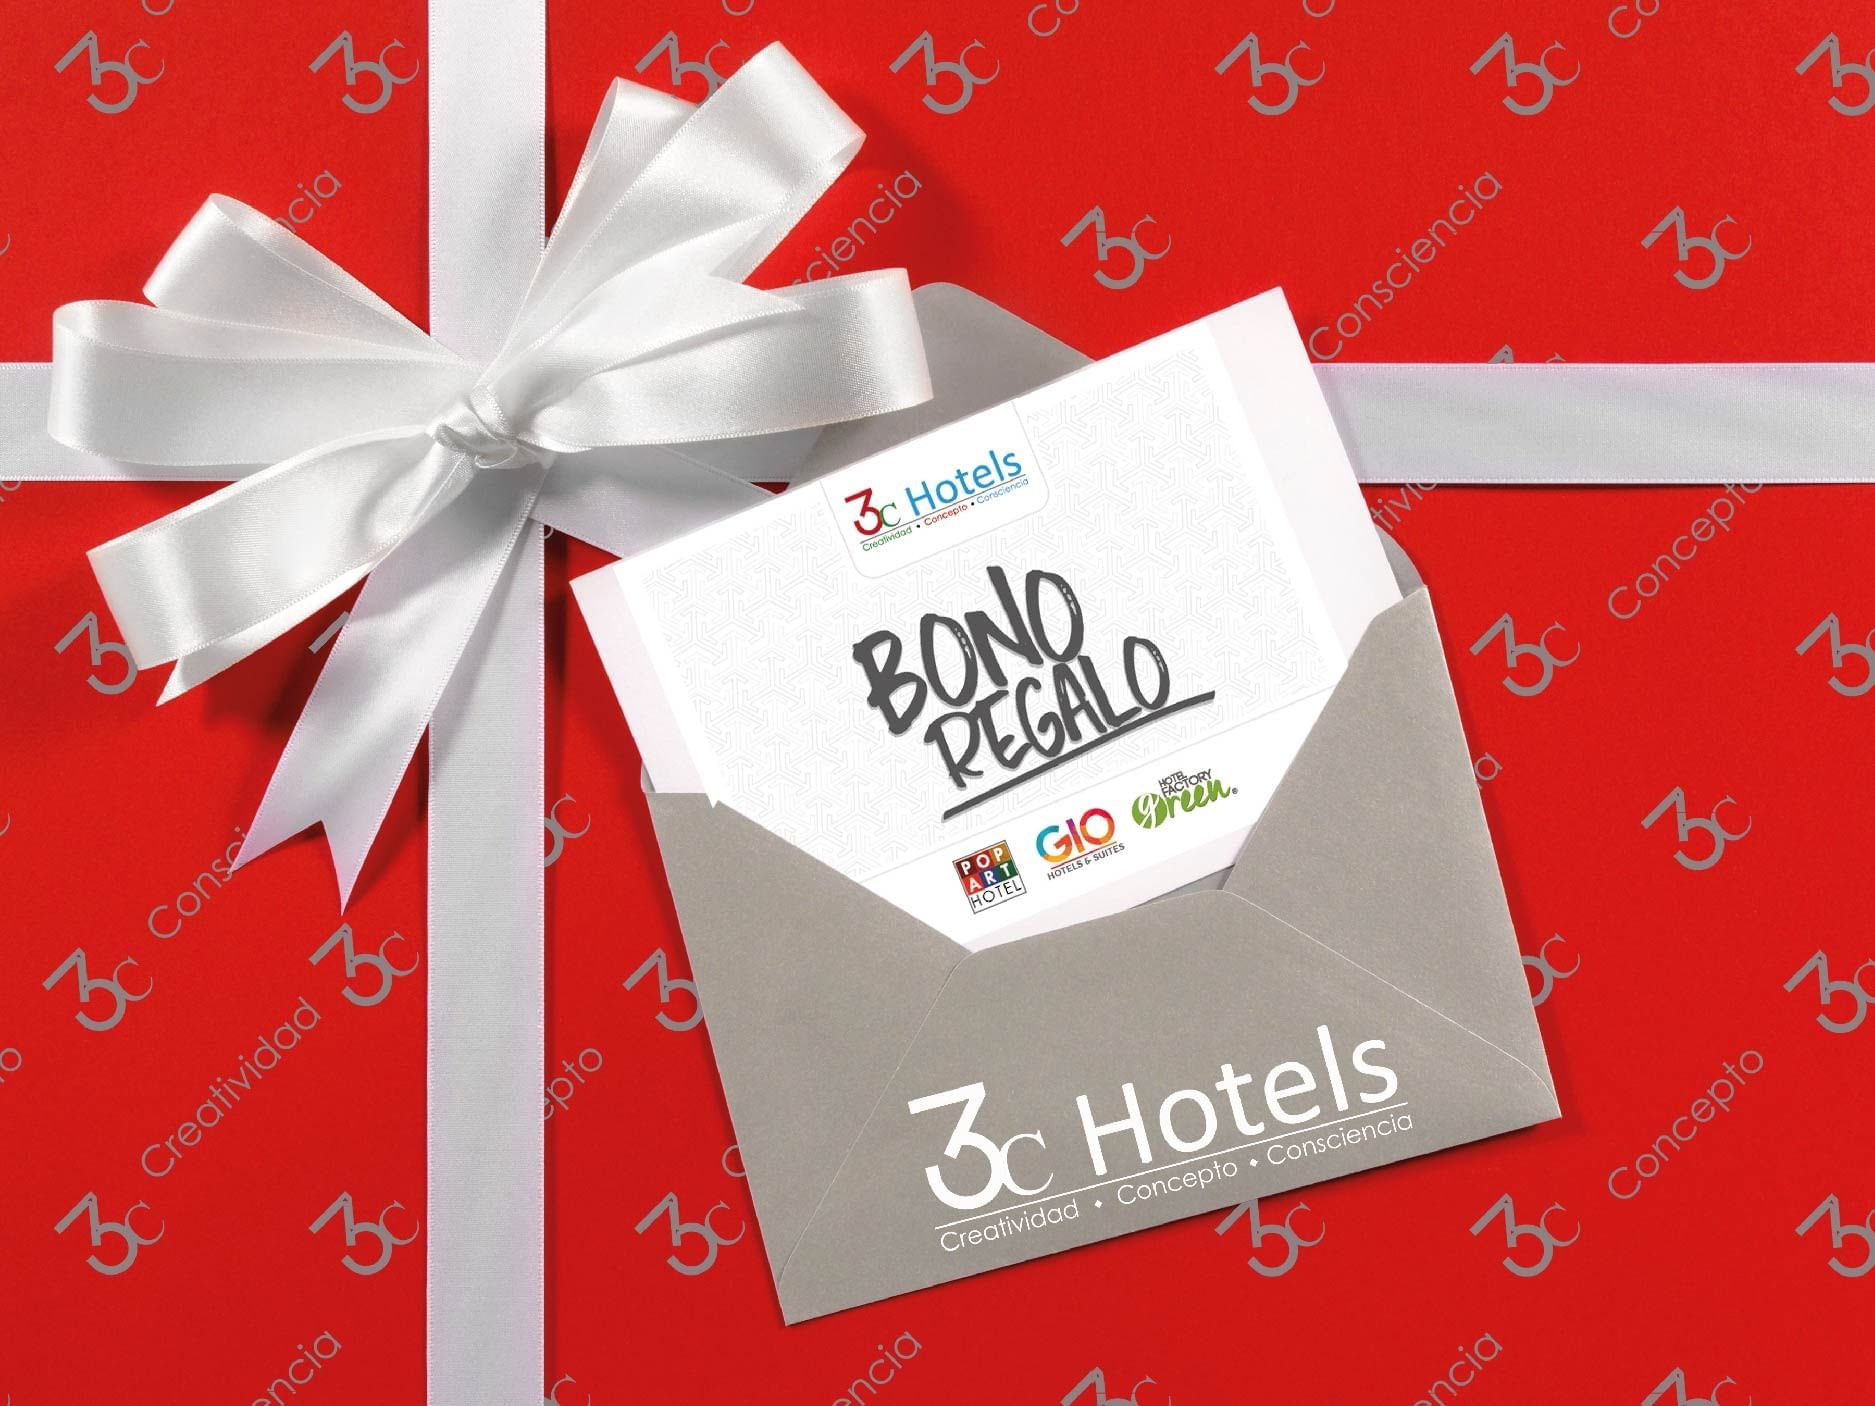 Close-up of Bono Regalo gift voucher at 3C Hotels